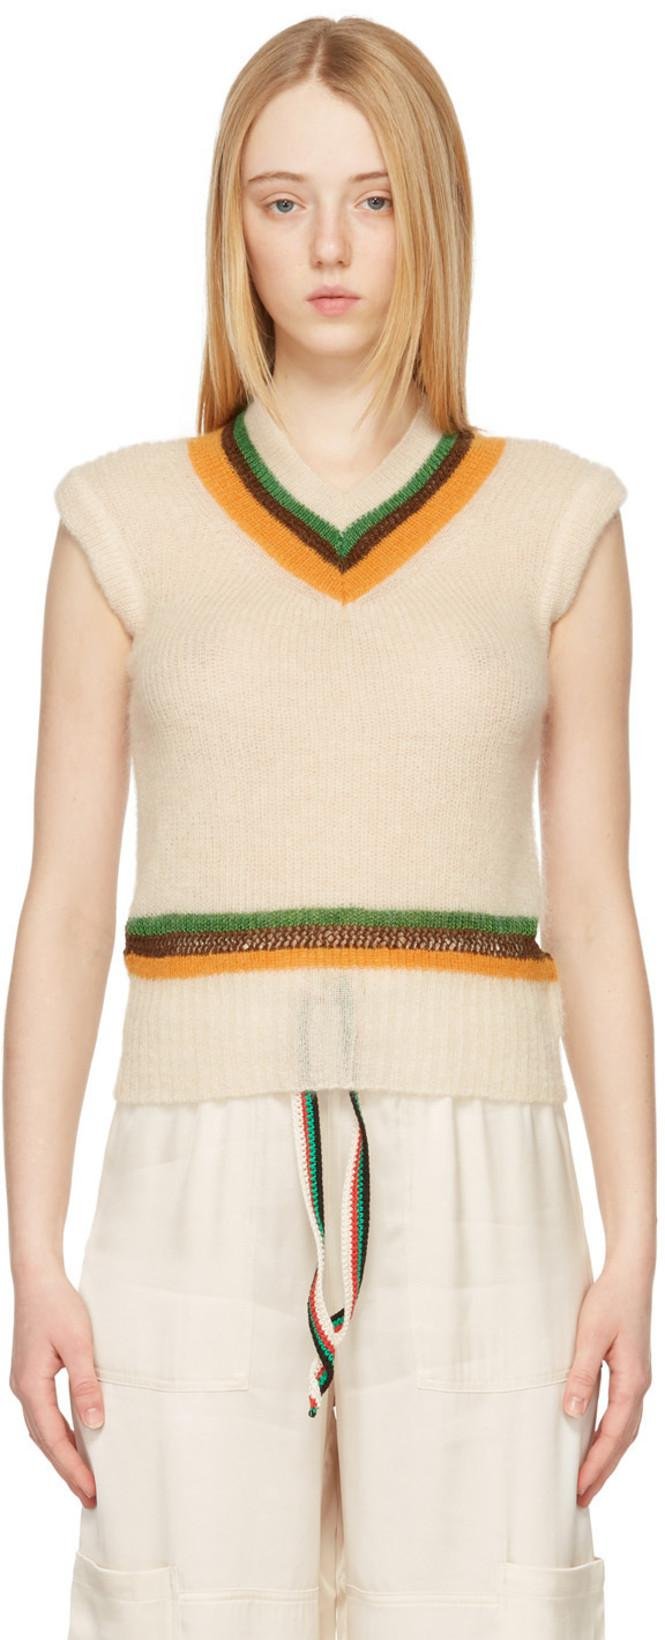 Off-White Saint Knitted Vest by WALES BONNER